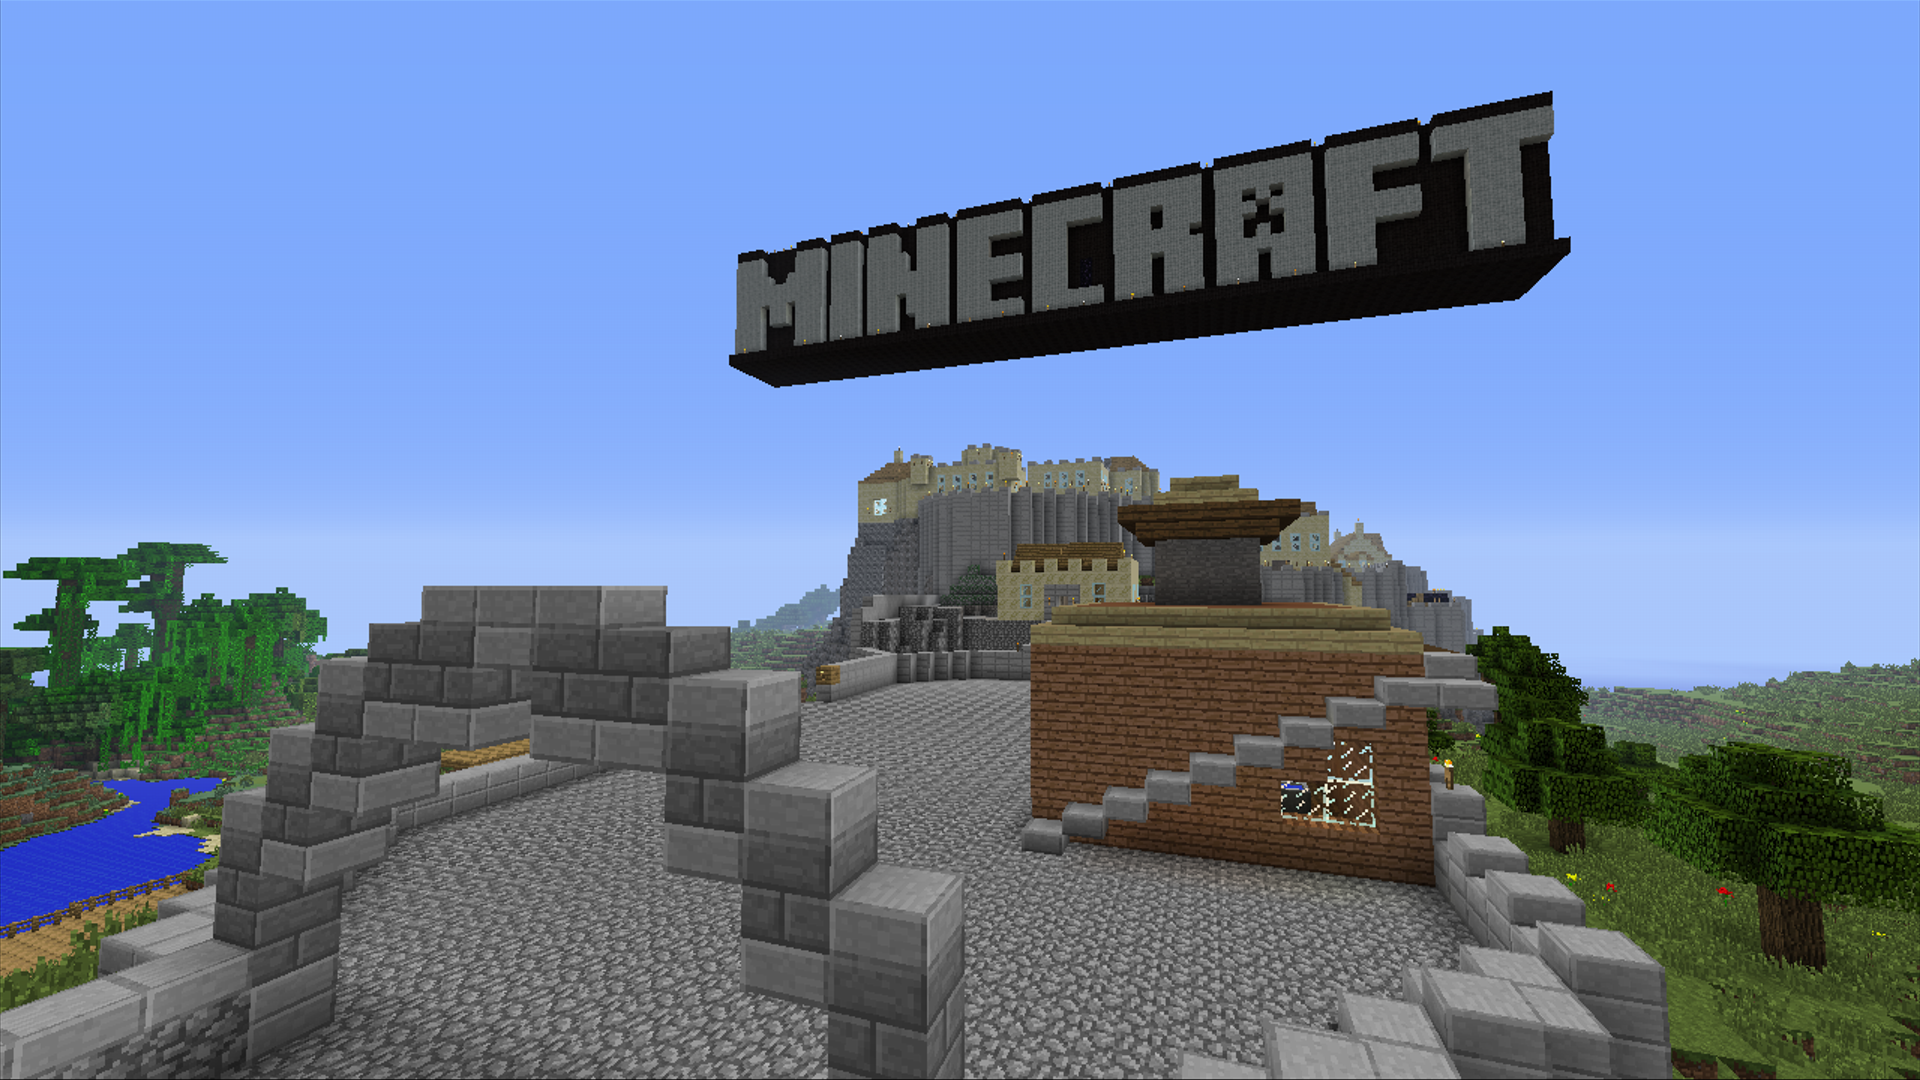 Microsoft To Acquire The Company Behind Minecraft For $2.5 Billion!